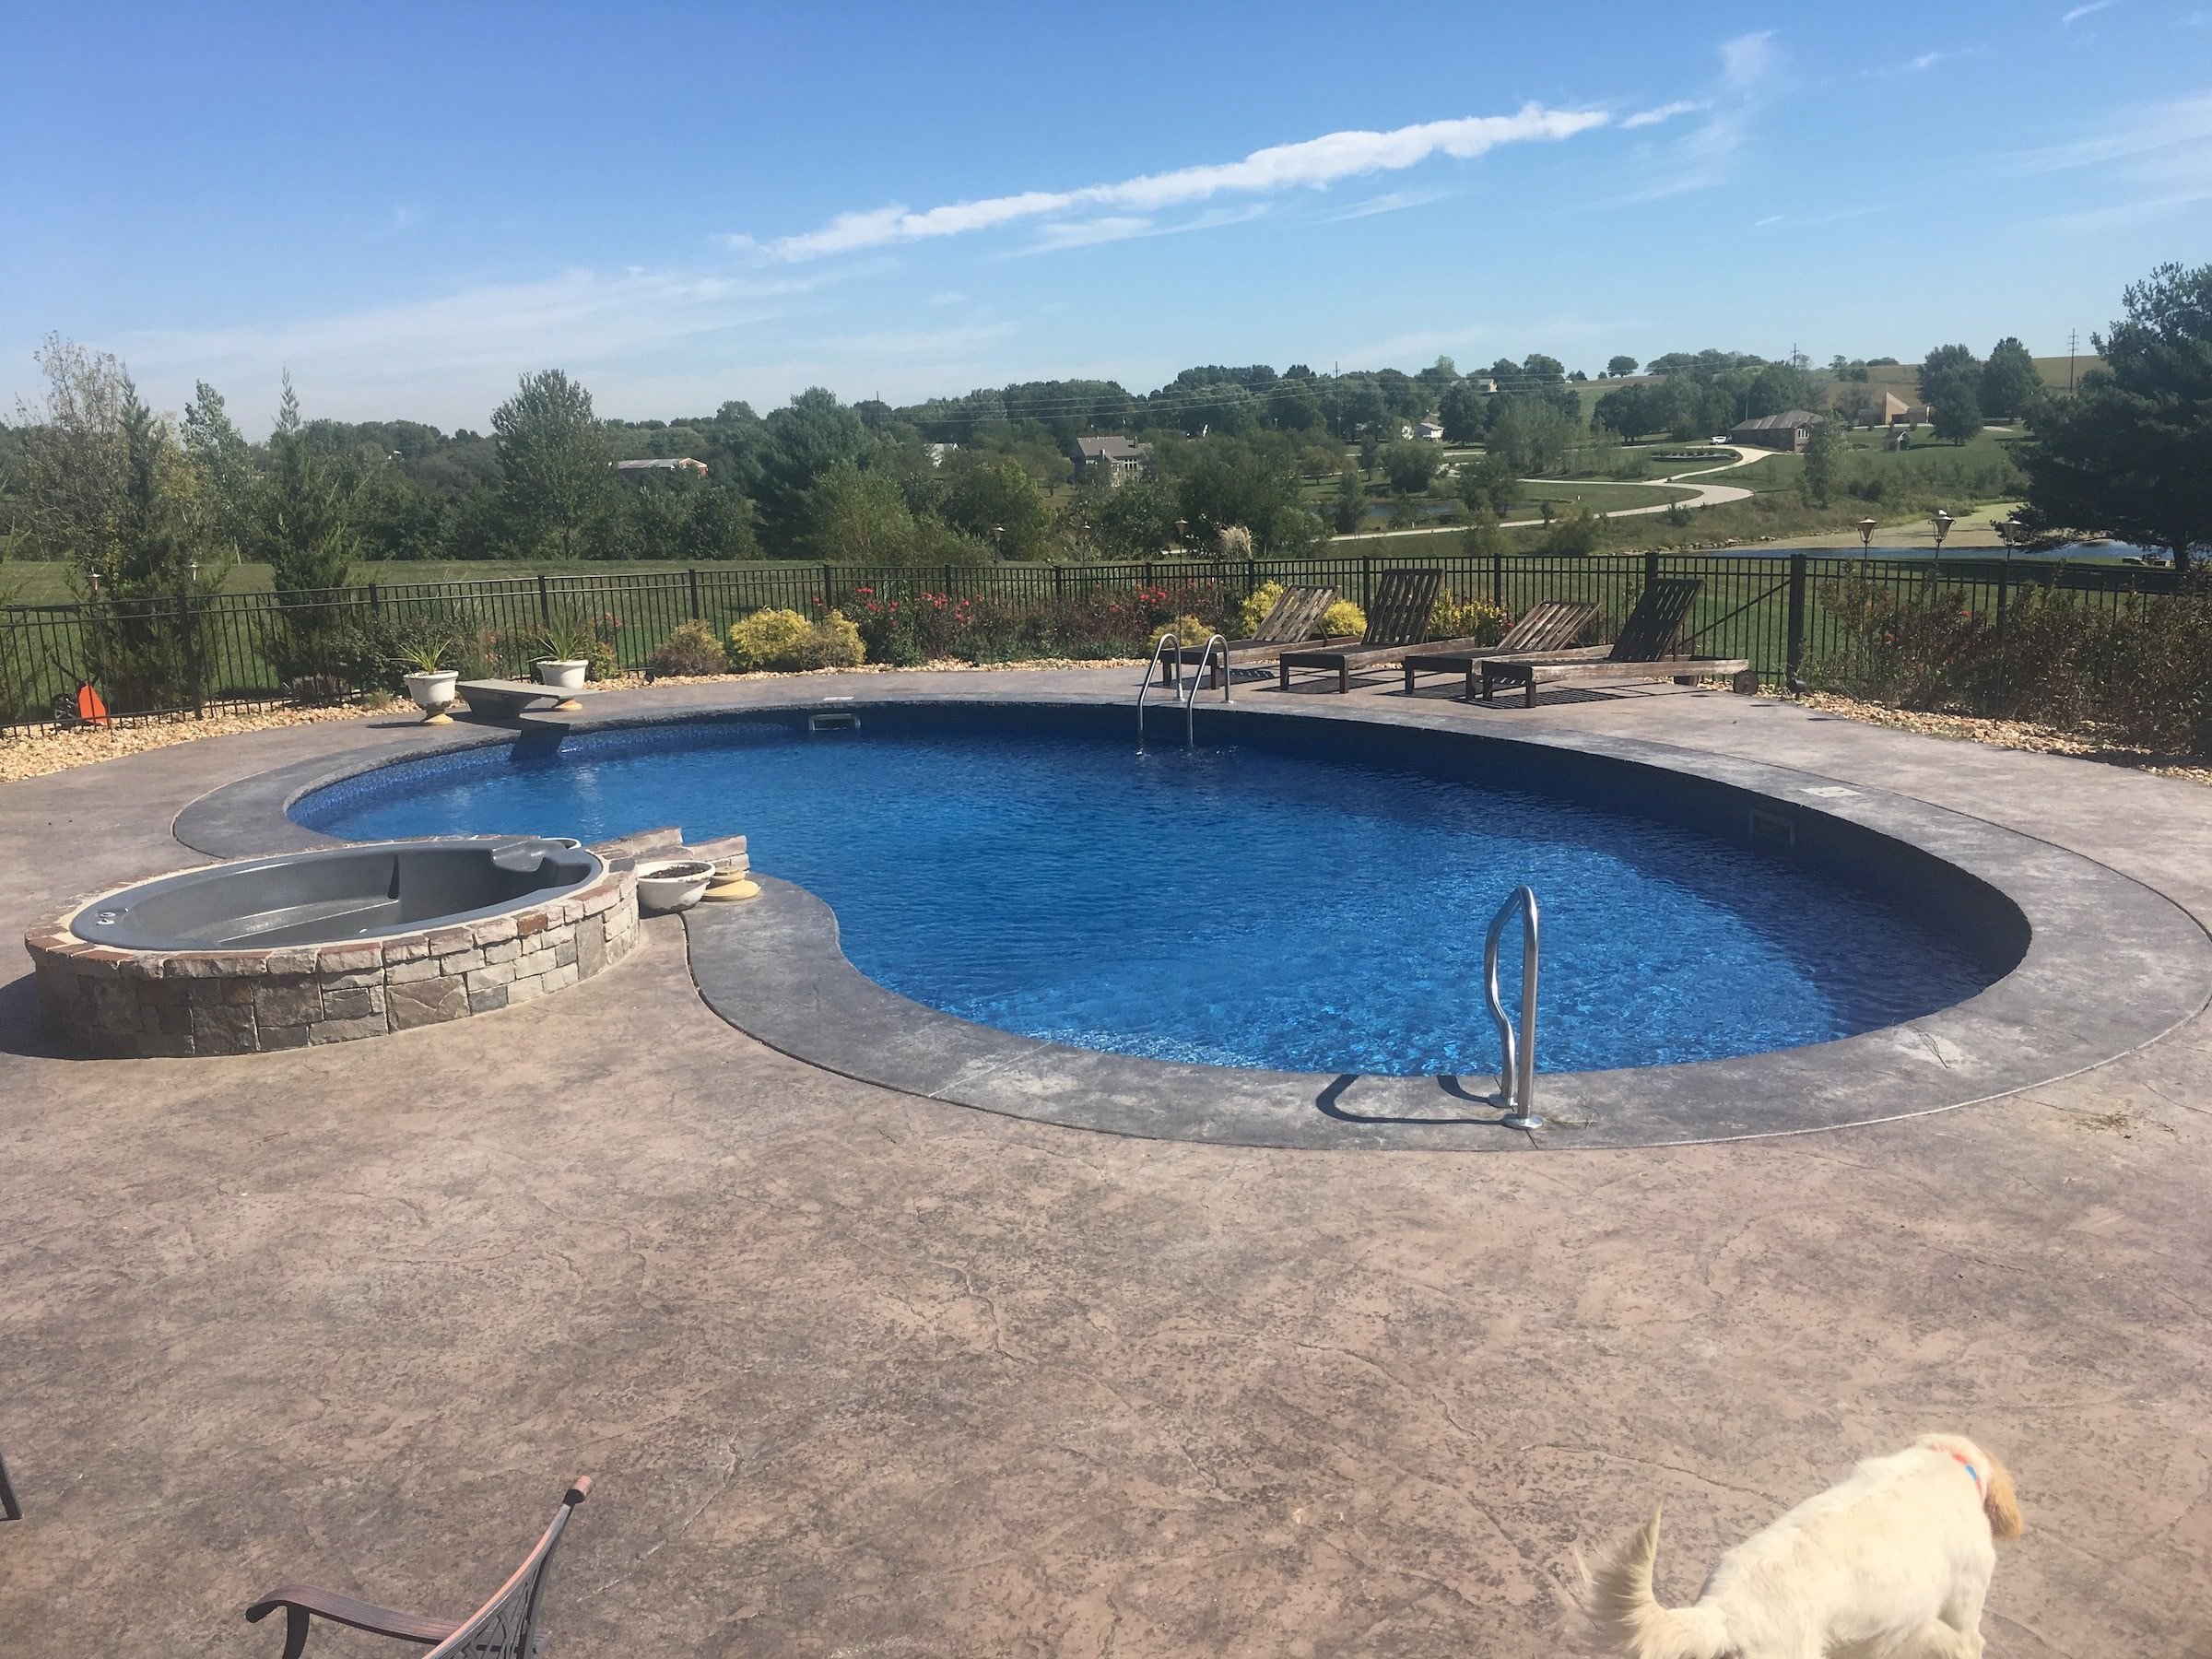 Pool Contractors In My Area, In Ground Swimming Pool Contractors Near Me, Inground Swimming Pool Contractors Near Me.JPG